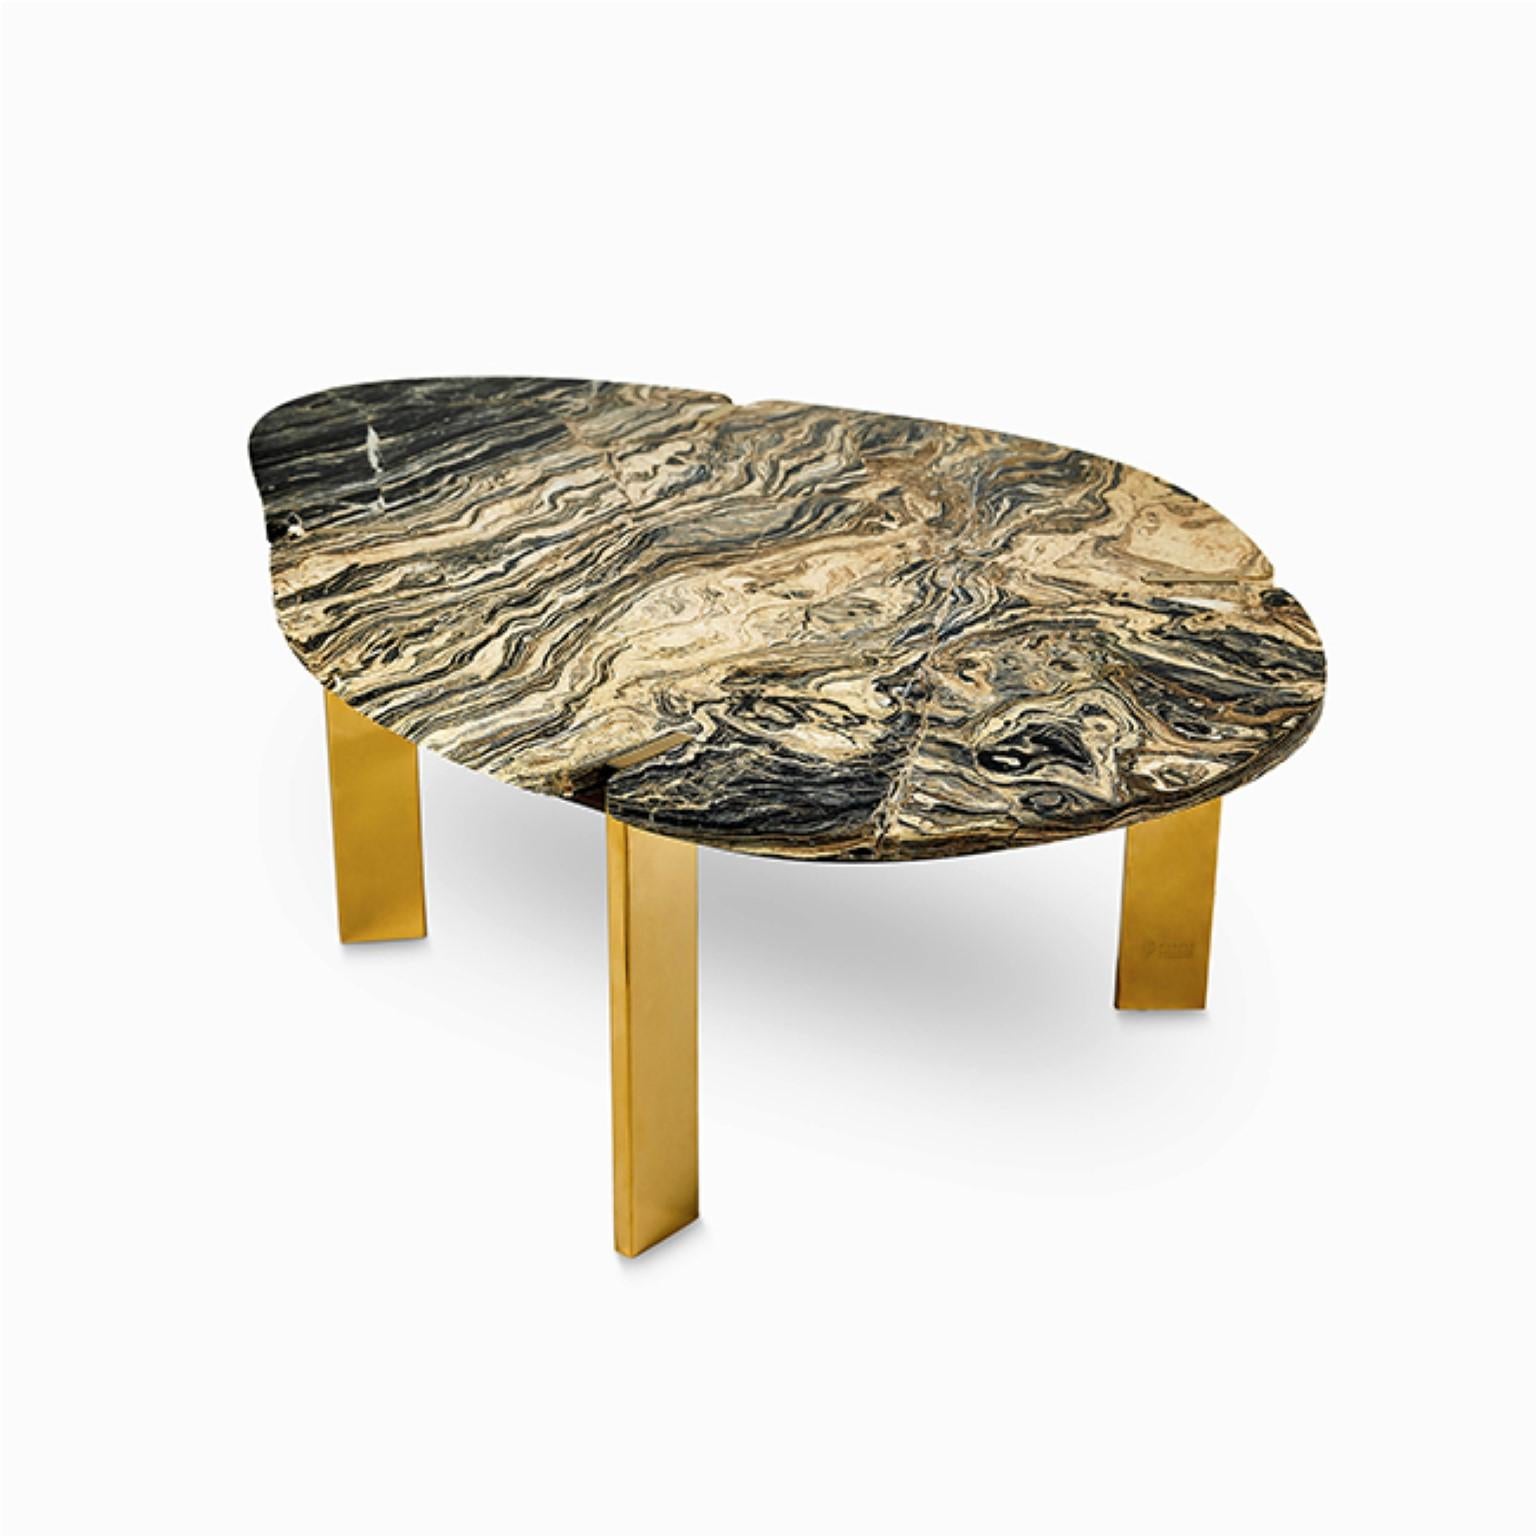 Gold Halys coffee table by Marble Balloon.
Dimensions: W 130 x D 88 x H 39.5 cm.
Materials: Steel, Marble

Taking its form from the famous Halys River, it consists of carrier legs made of titanium coating on stainless
metal and a marble